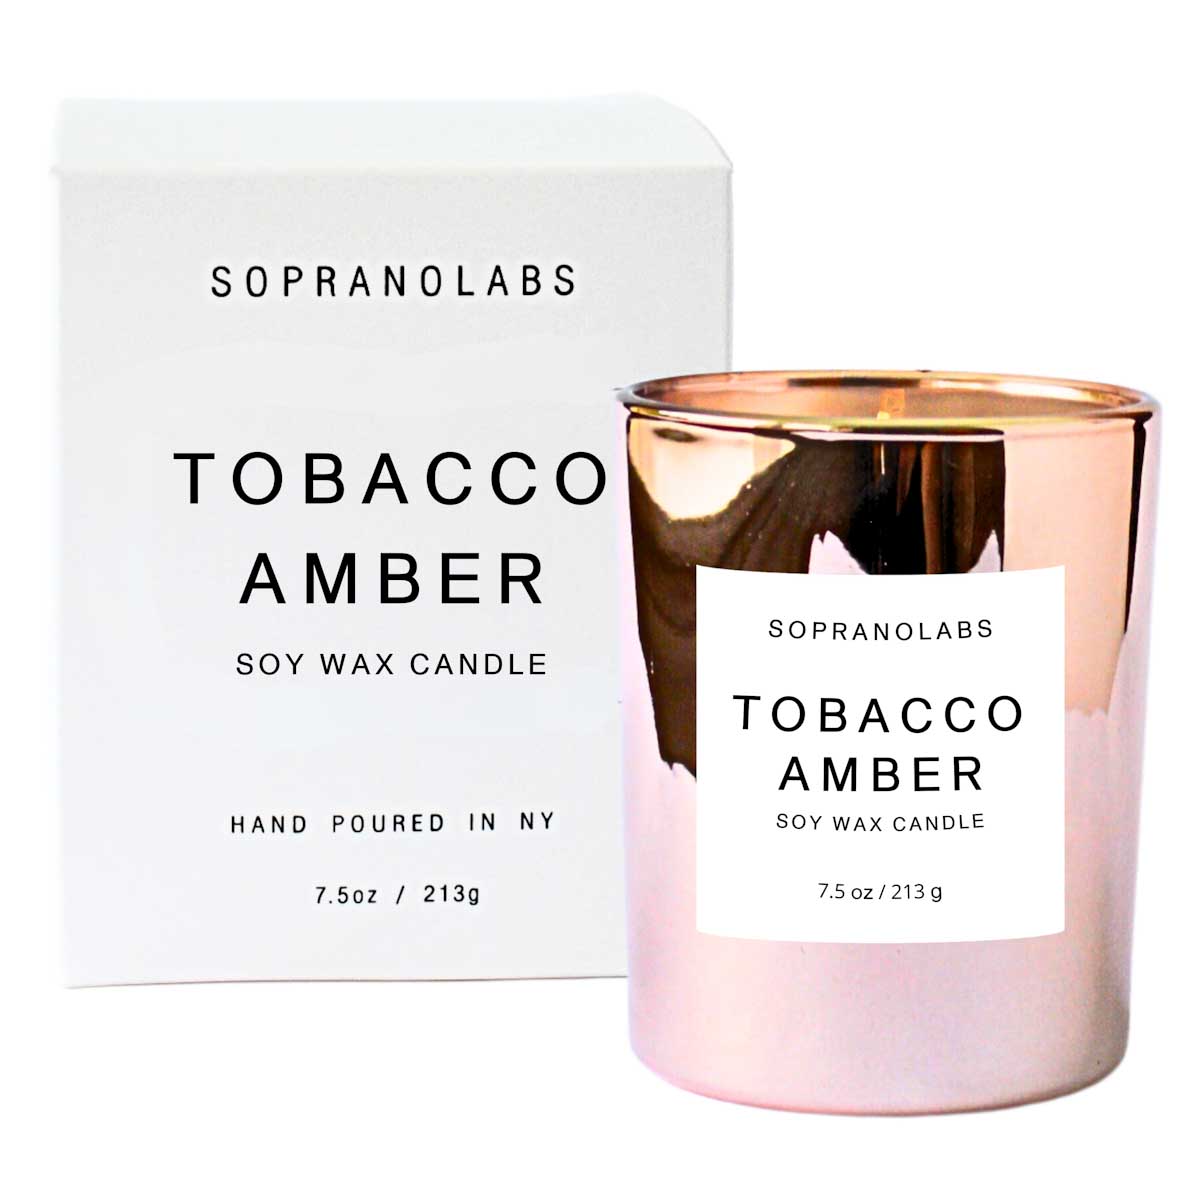 TOBACCO AMBER Soy Wax Candle by SopranoLabs